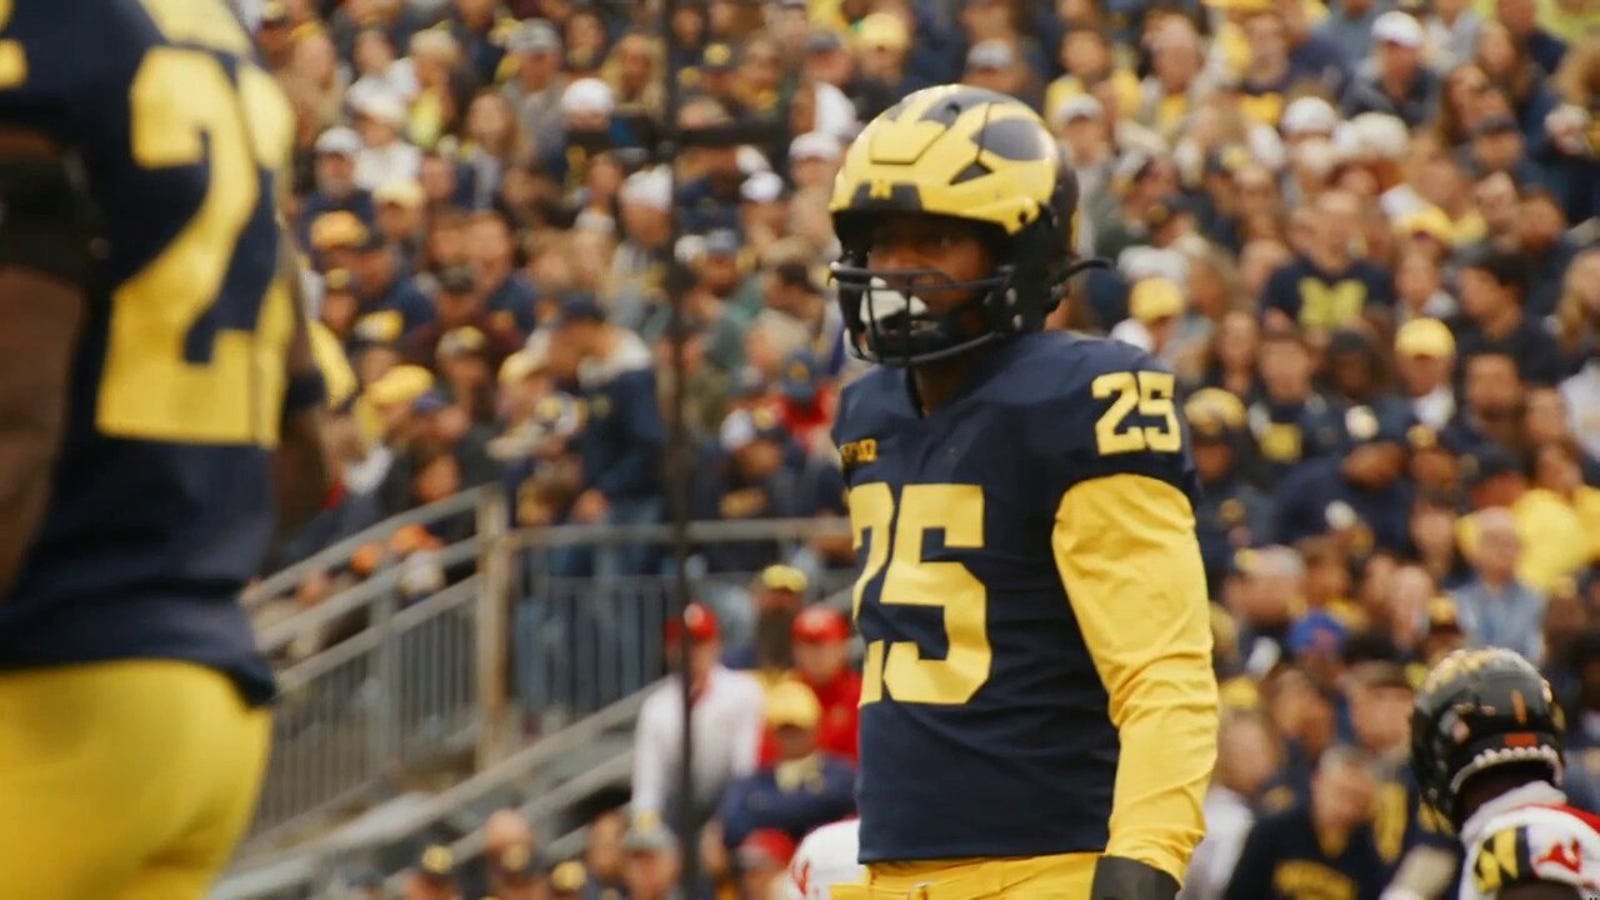 Junior Colson's incredible journey from Haiti to Ann Arbor